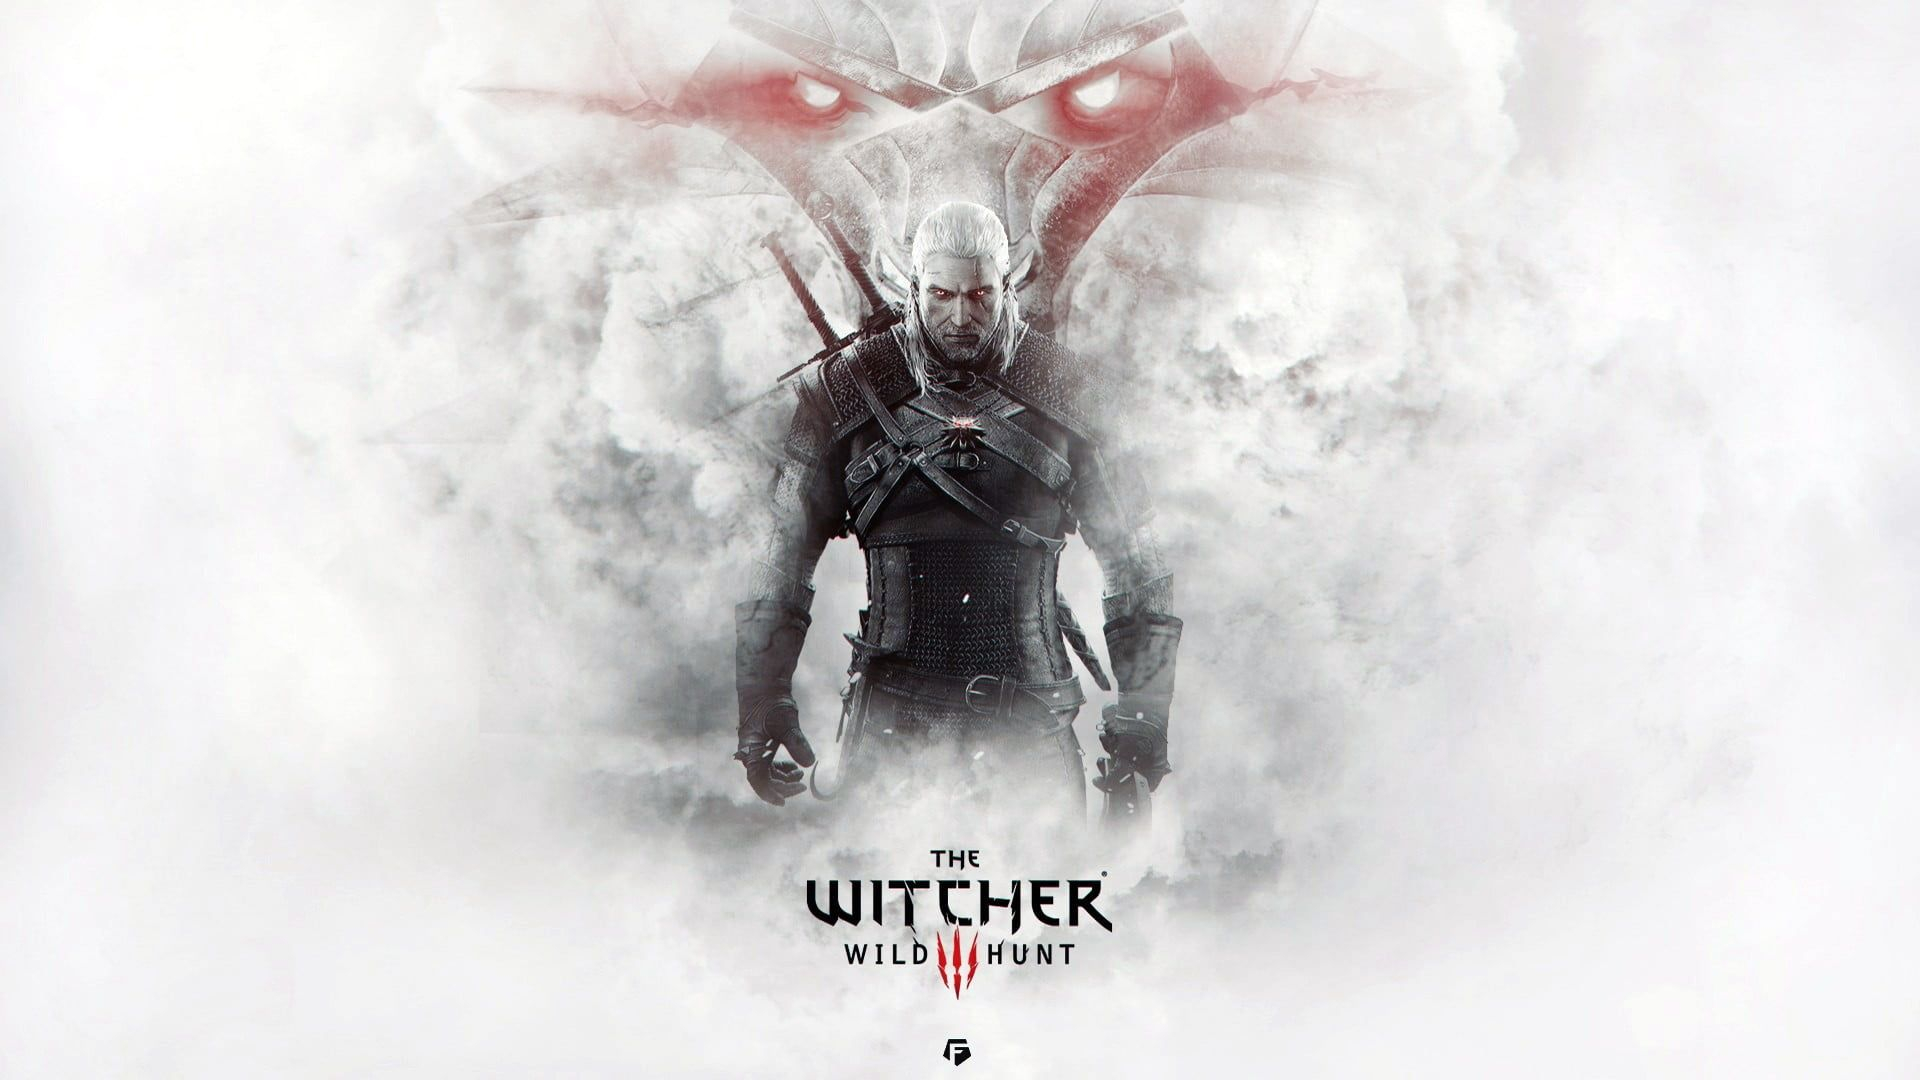 1920x1080 The Witcher Wild Hunt 3 digital wallpaper The Witcher 3: Wild Hunt The Witcher #1080P #wallpaper #hdwallpaper #&acirc;&#128;&brvbar; | The witcher wild hunt, The witcher, The witcher 3